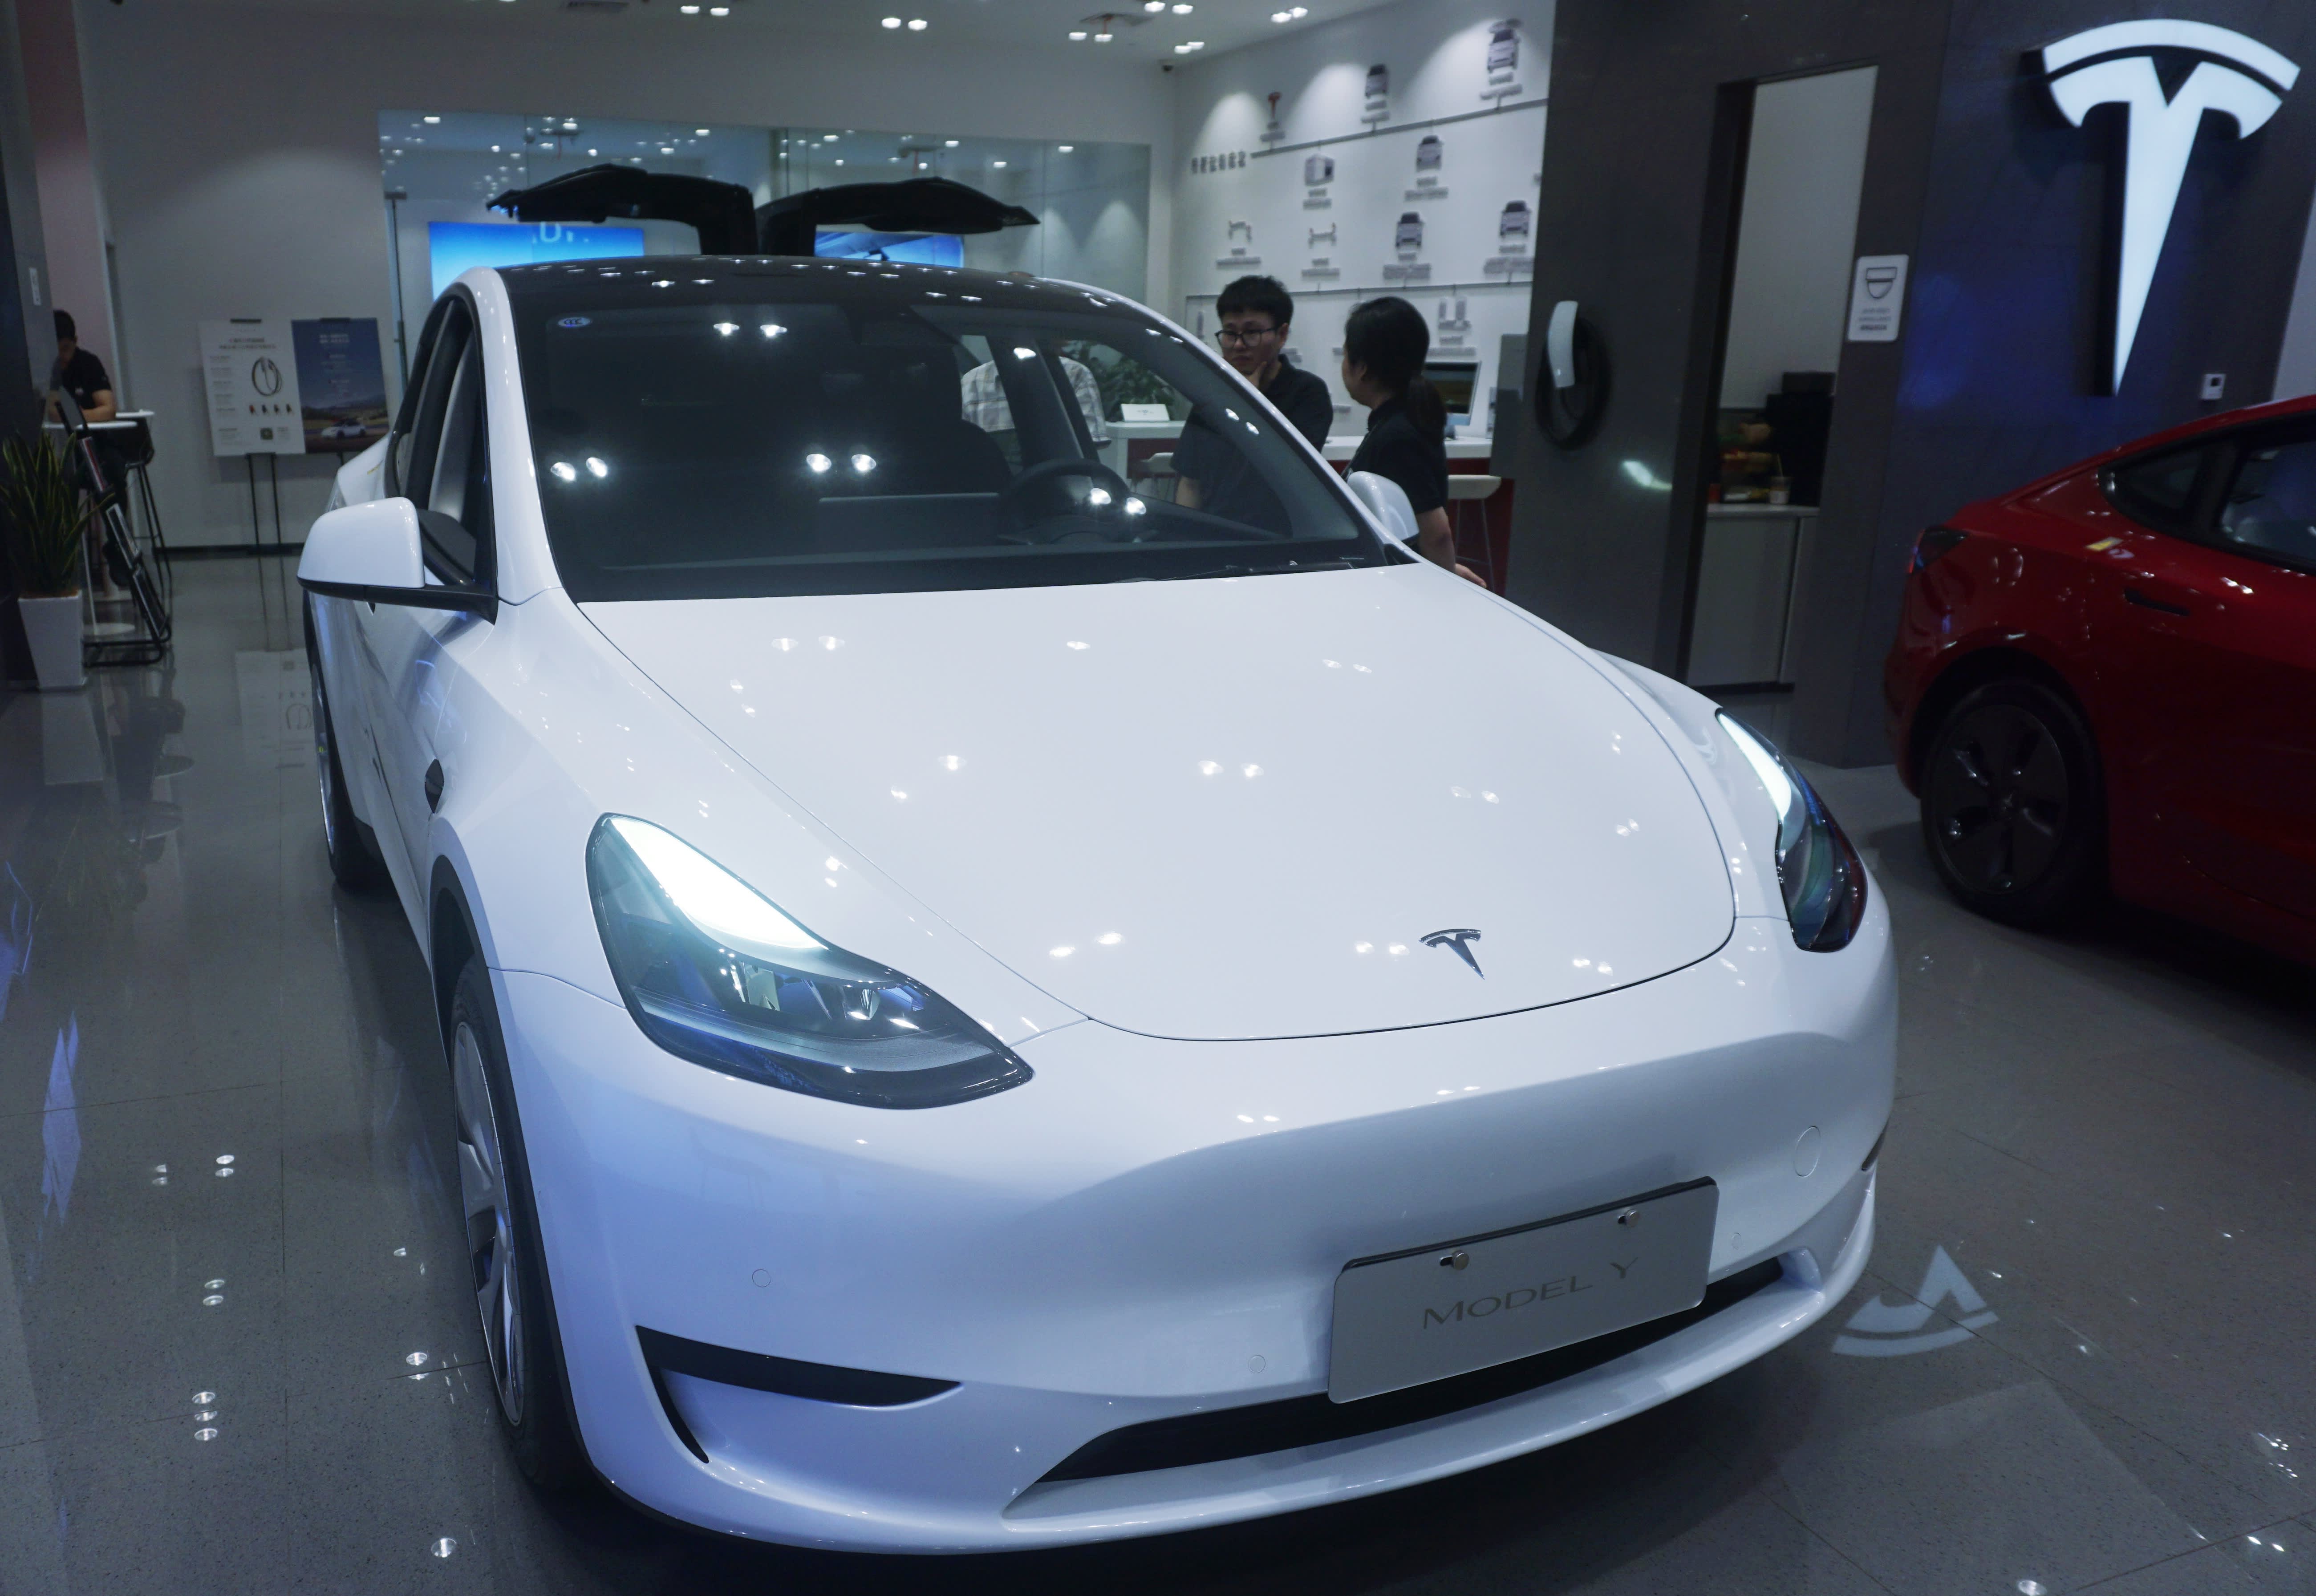 Revamped Tesla Model 3 expected to be launched in China this month